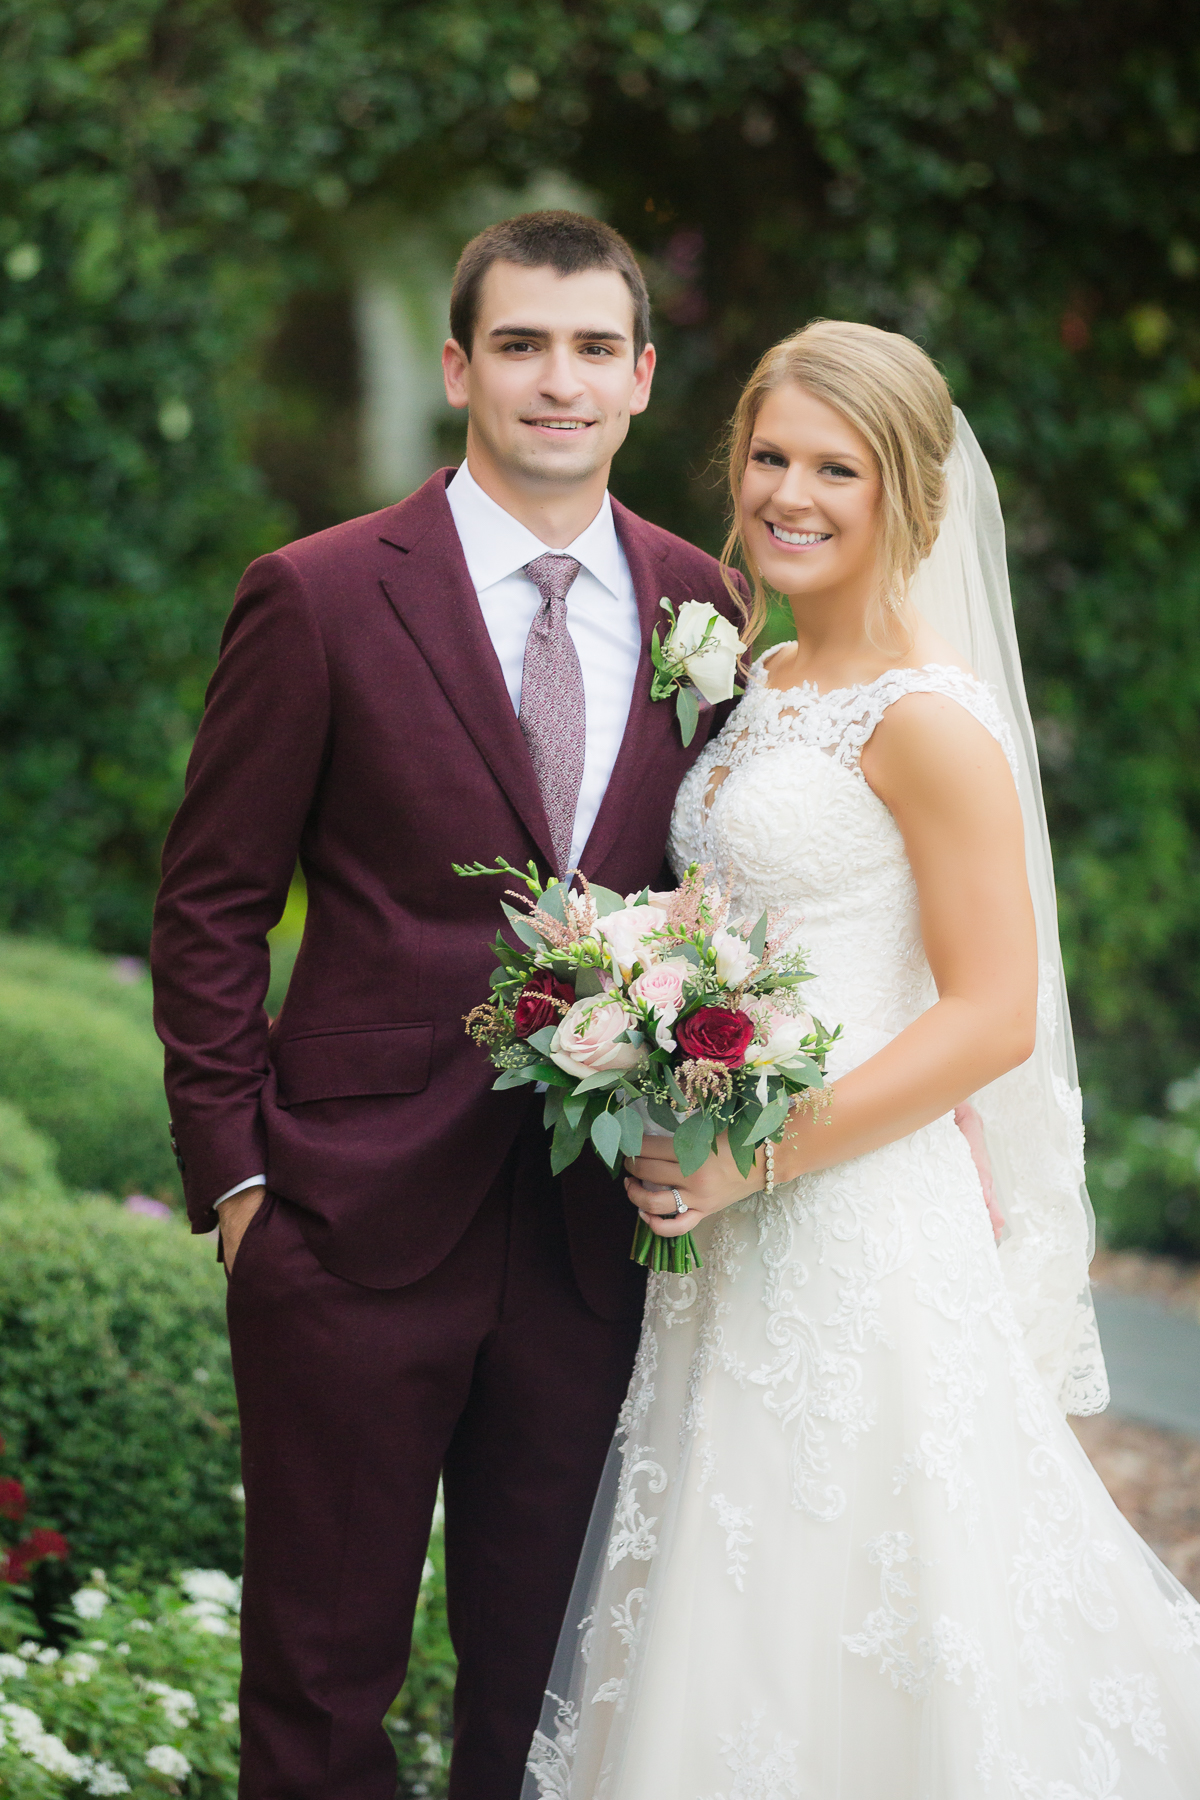 The Ultimate Aggie Wedding - Featured! - Jessica Pledger Photography